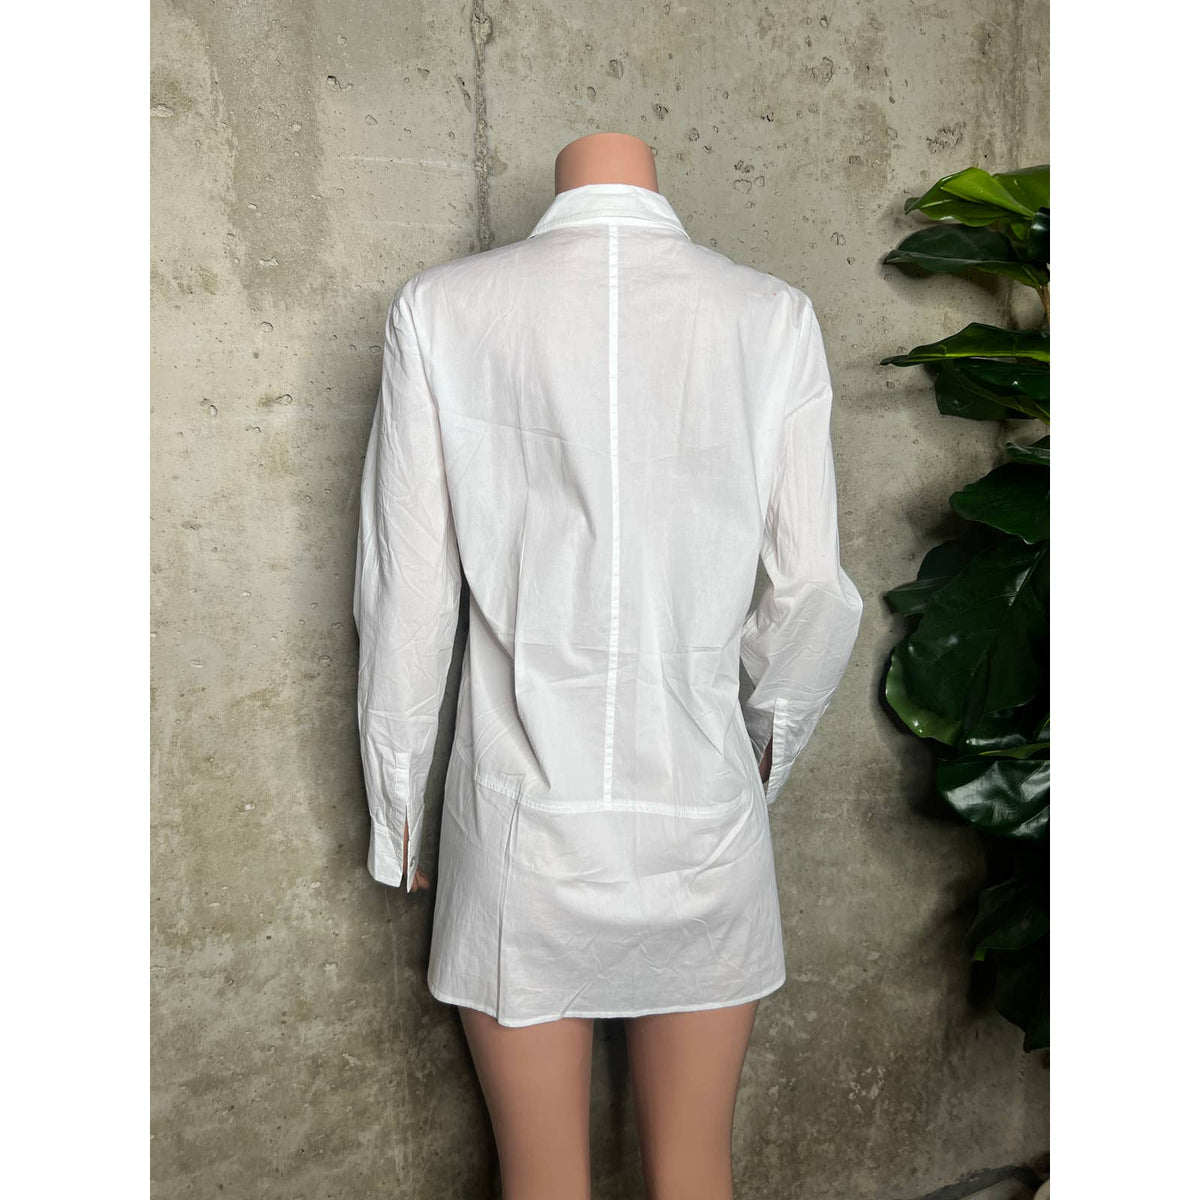 Eileen Fisher White Button-Up Blouse Sz. Small